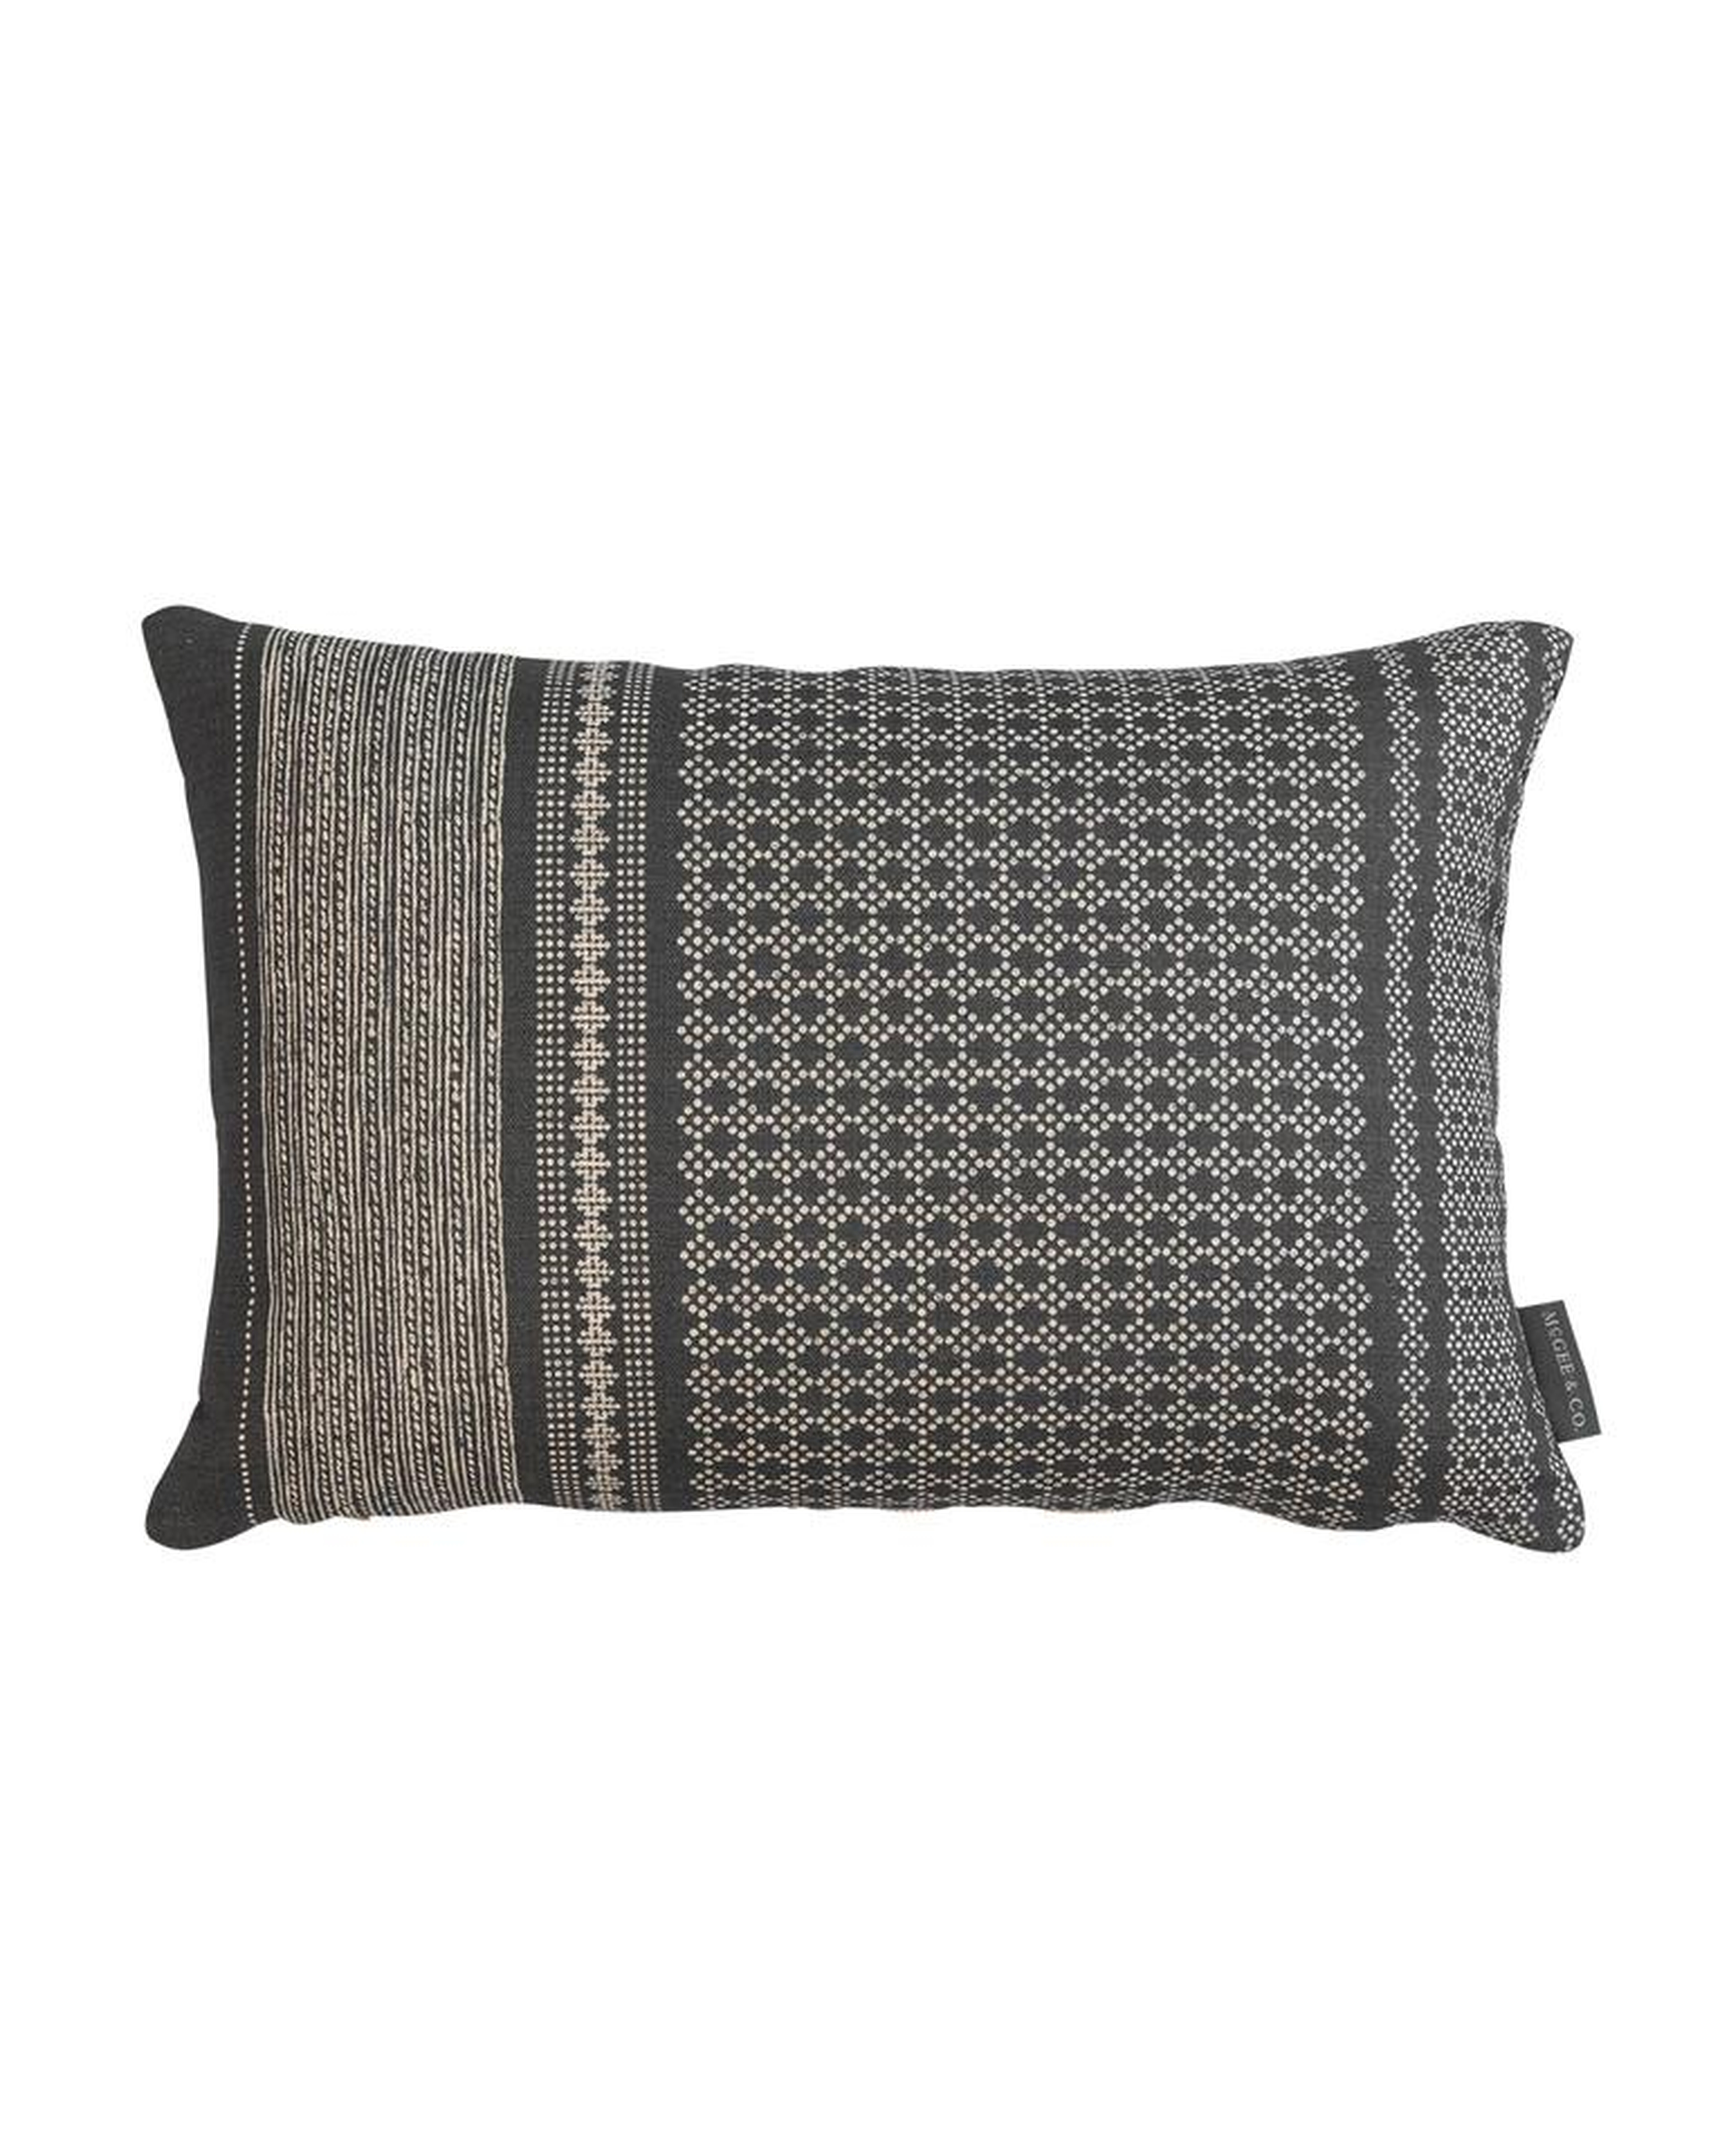 ELLEN DOTTED PRINT PILLOW COVER - McGee & Co.